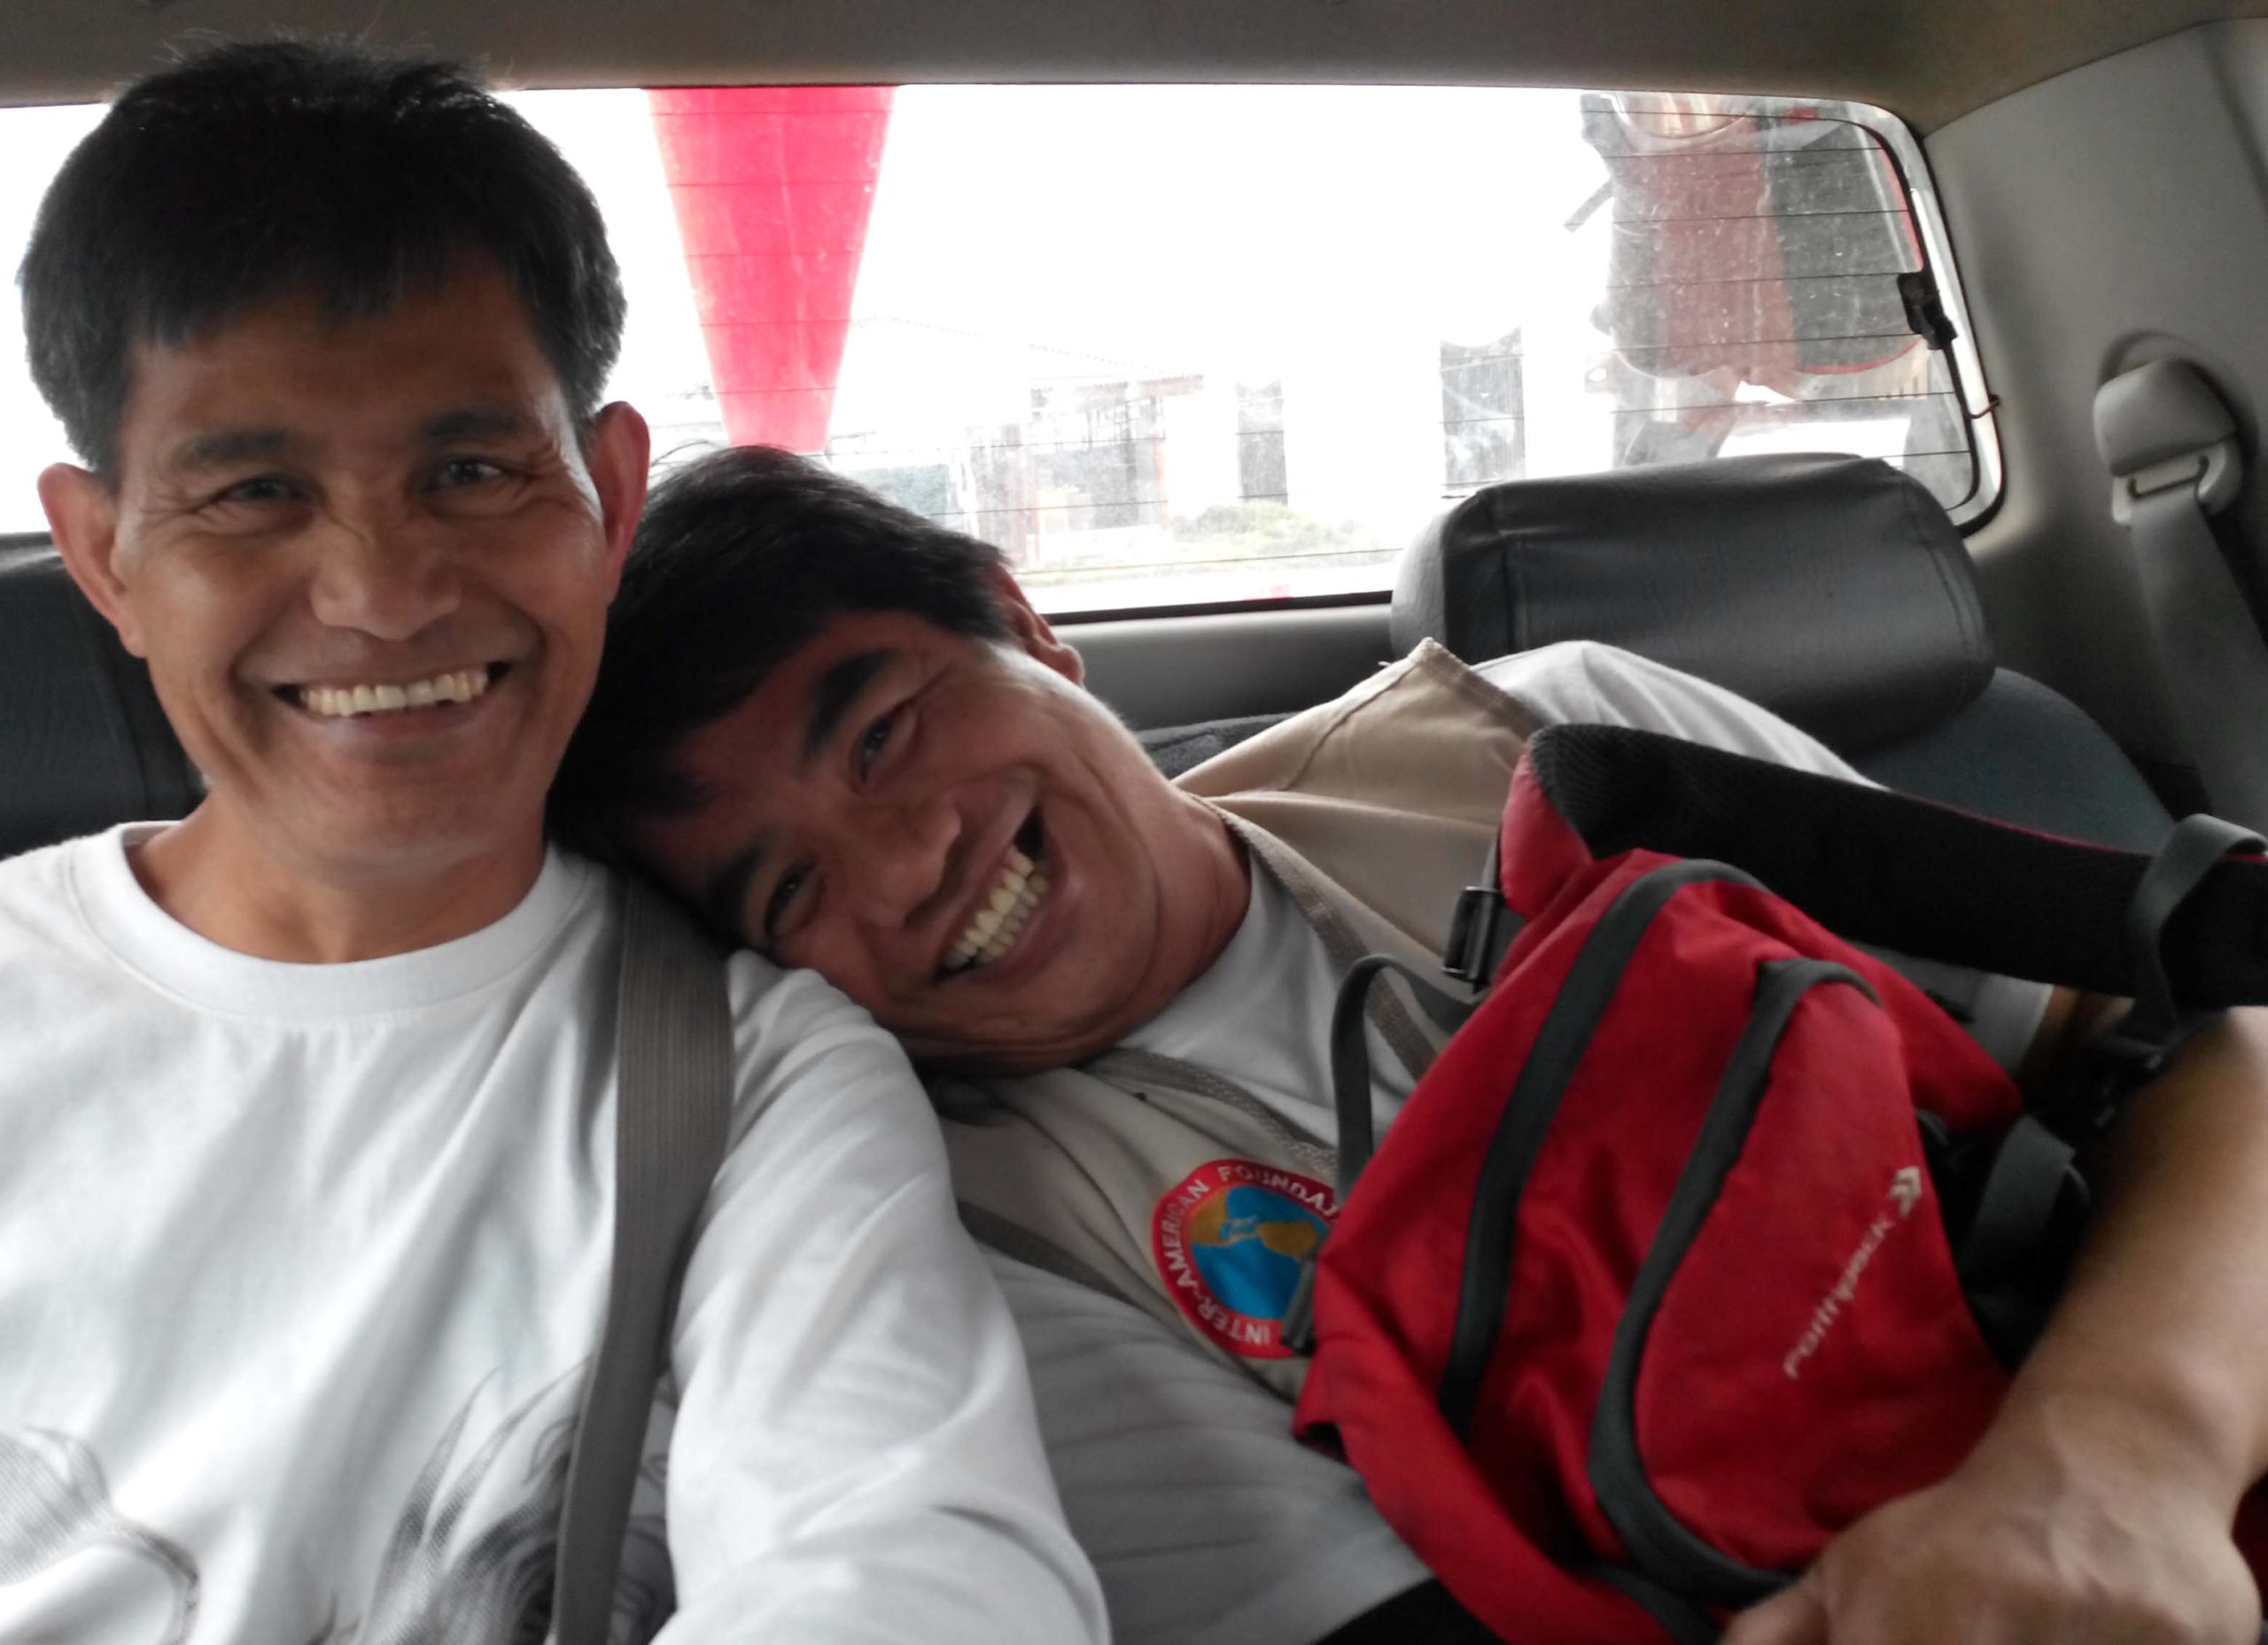 Leoncio and a friend arrives in Peru, in high spirits, for the latest round of mercury-free trainings.